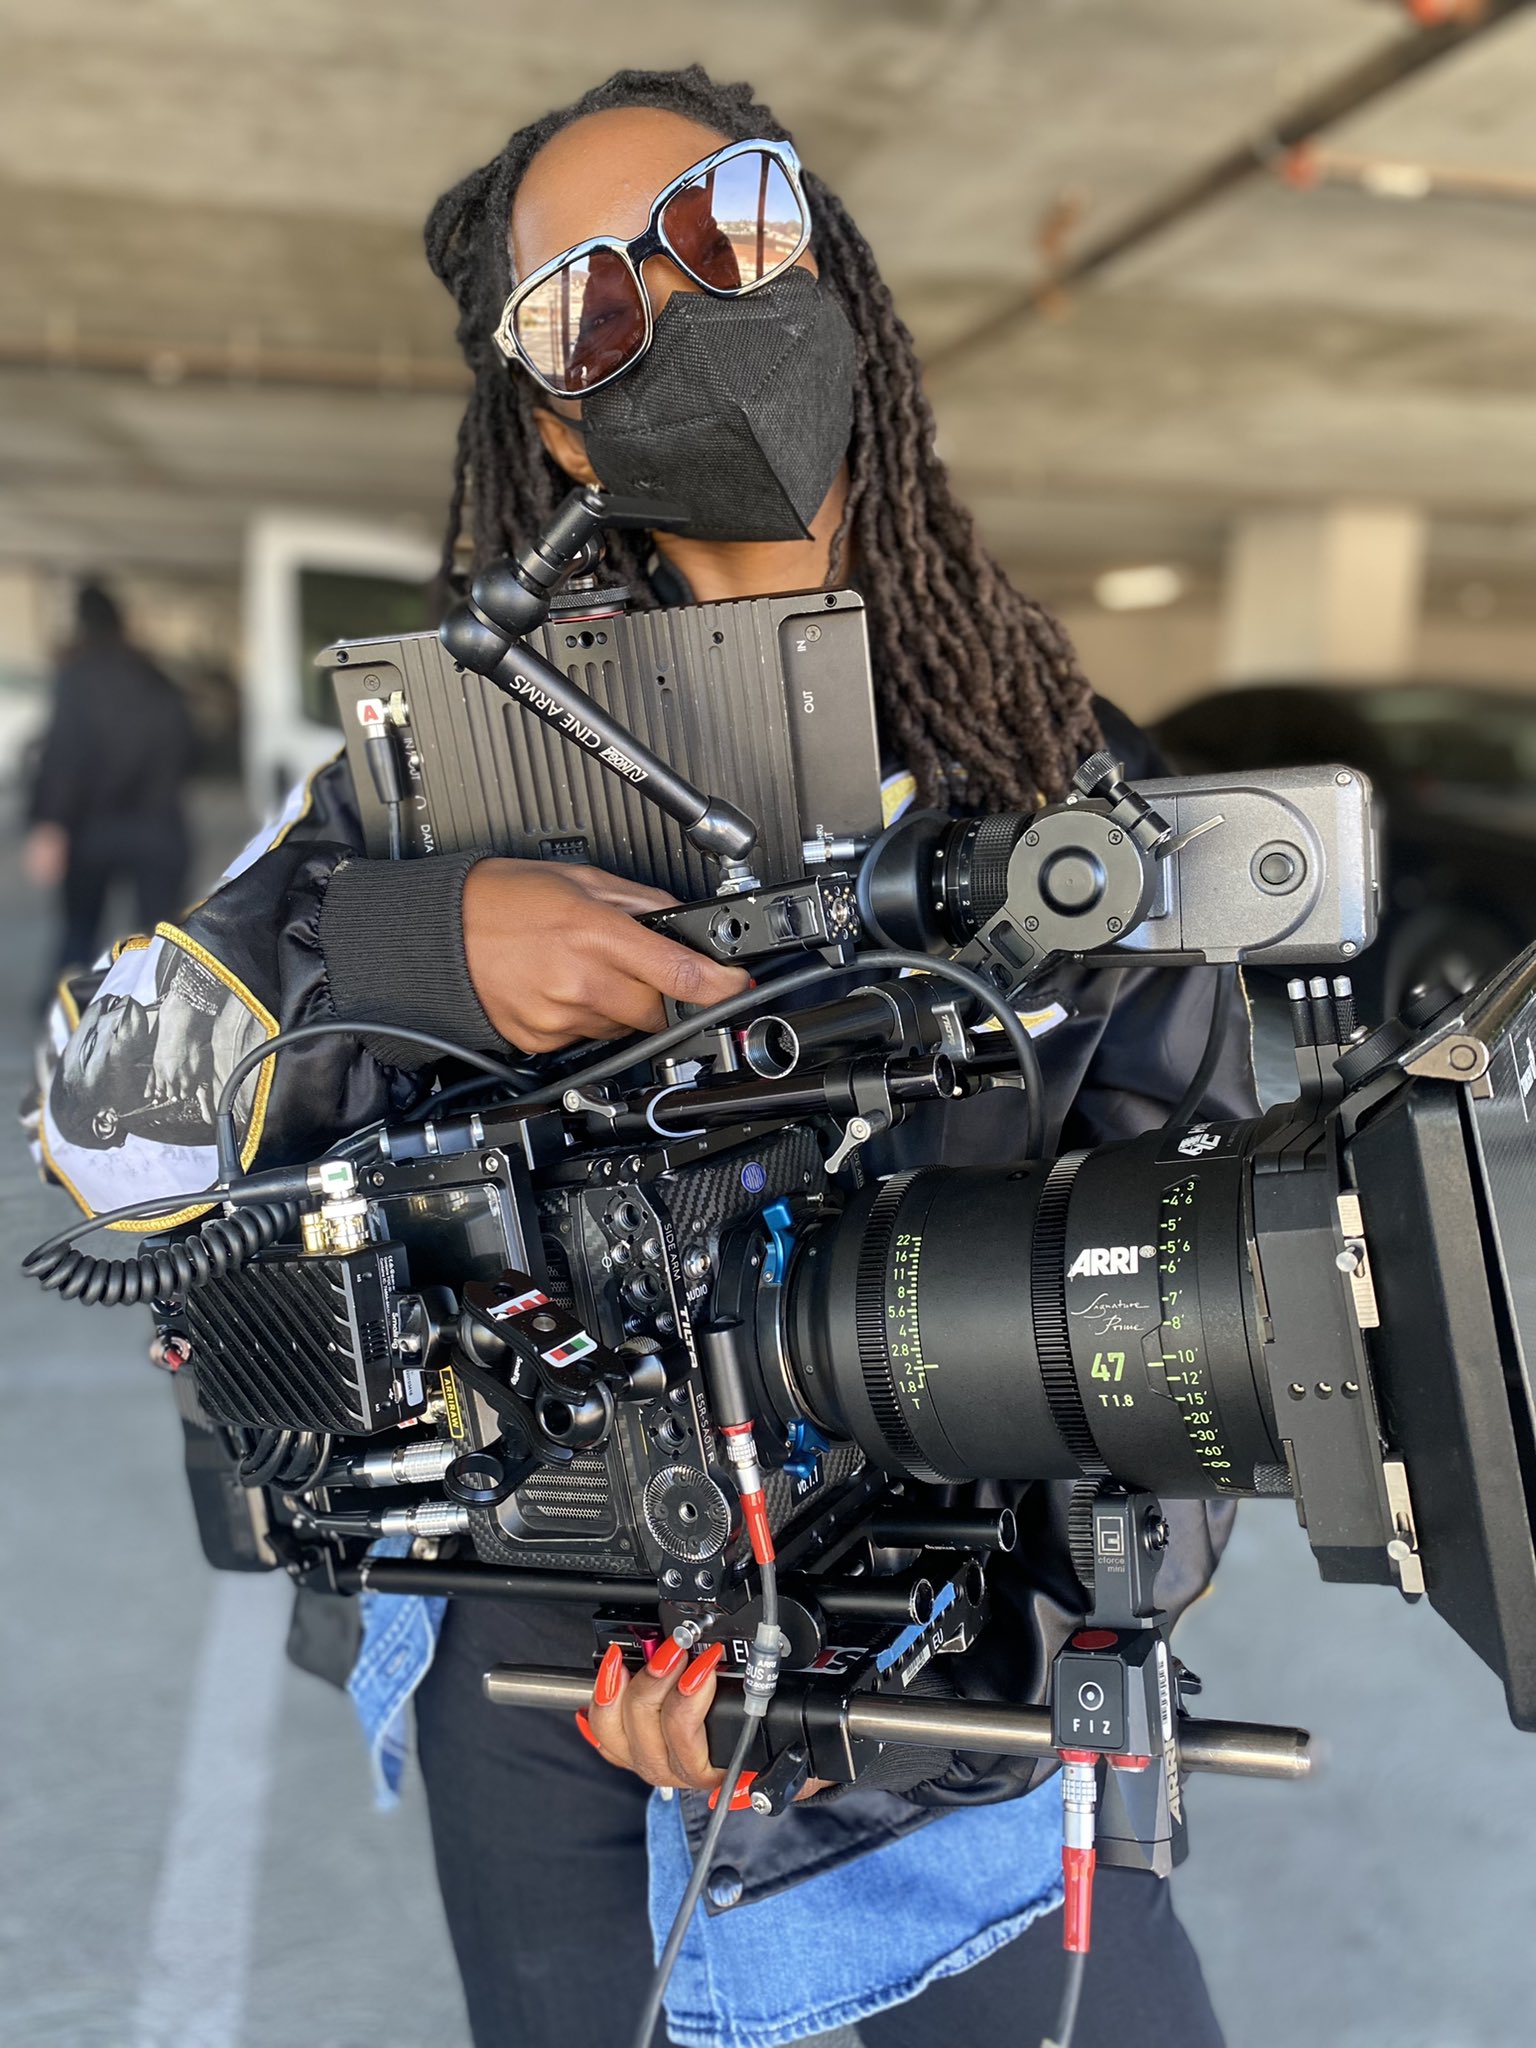 Sam Hicks on Twitter: "Thanks to @janae_brittney for pulling up on me  today. Dope Camera Operator!! https://t.co/XJXYSTgY6s" / Twitter